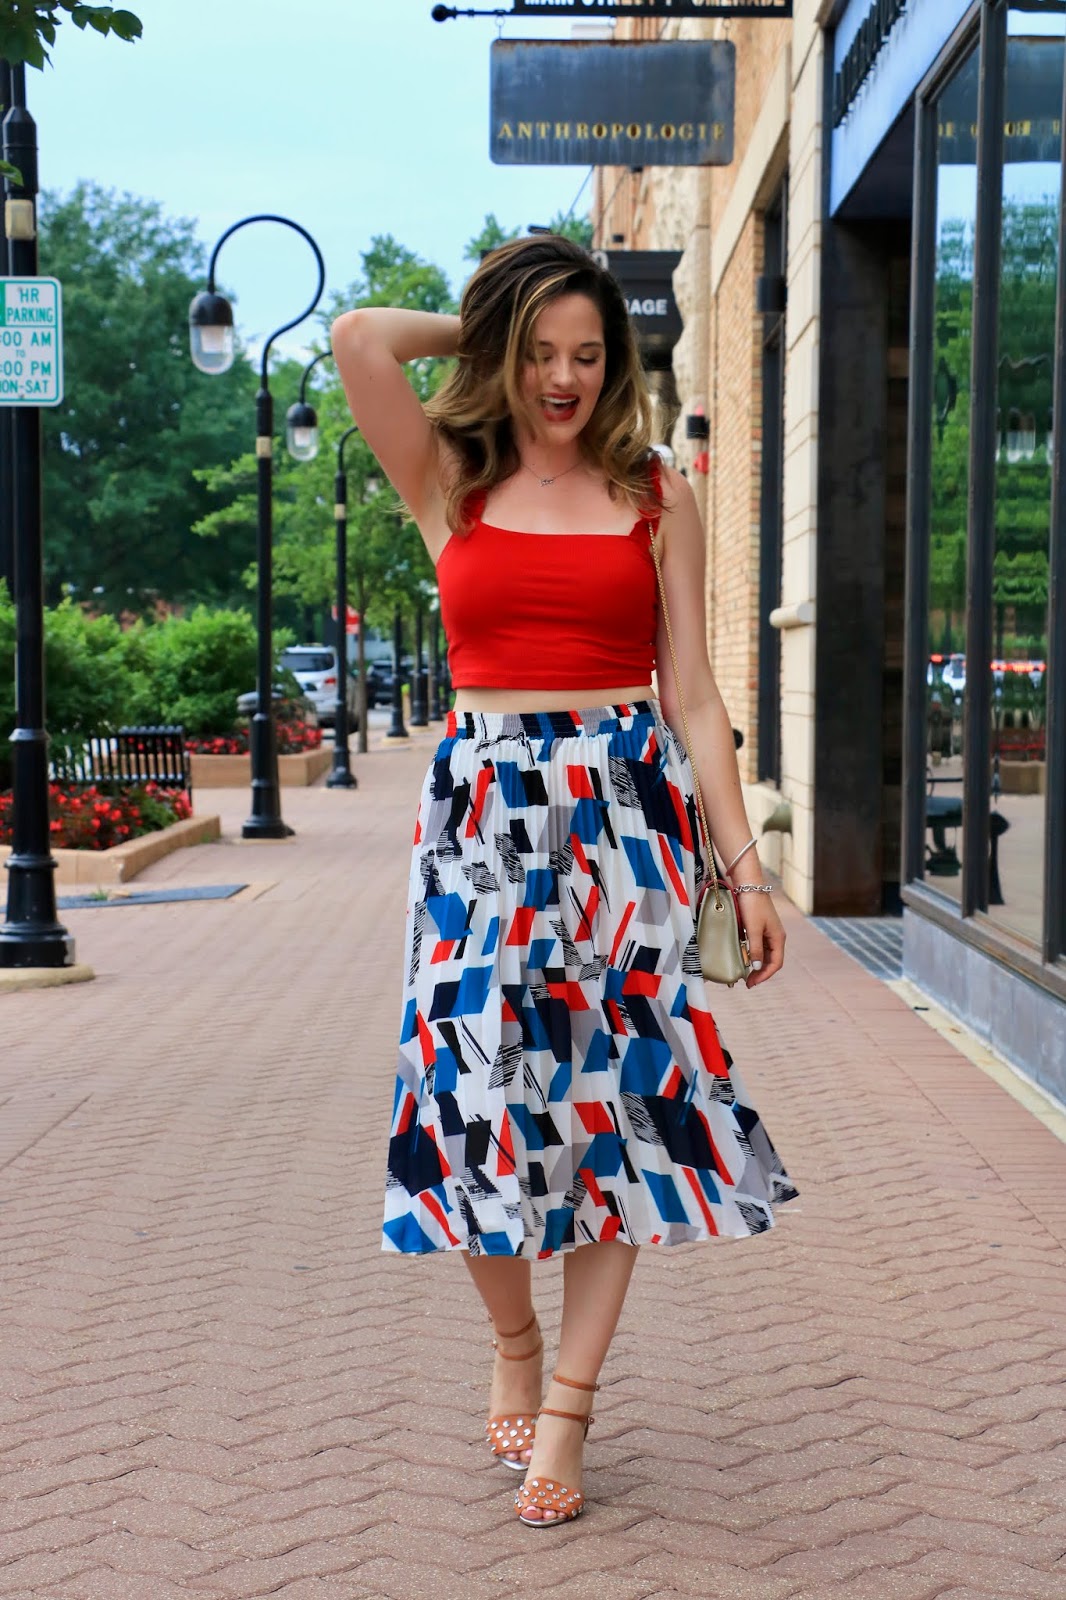 Nyc fashion blogger Kathleen Harper wearing a midi skirt outfit on the streets of Naperville, Illinois.